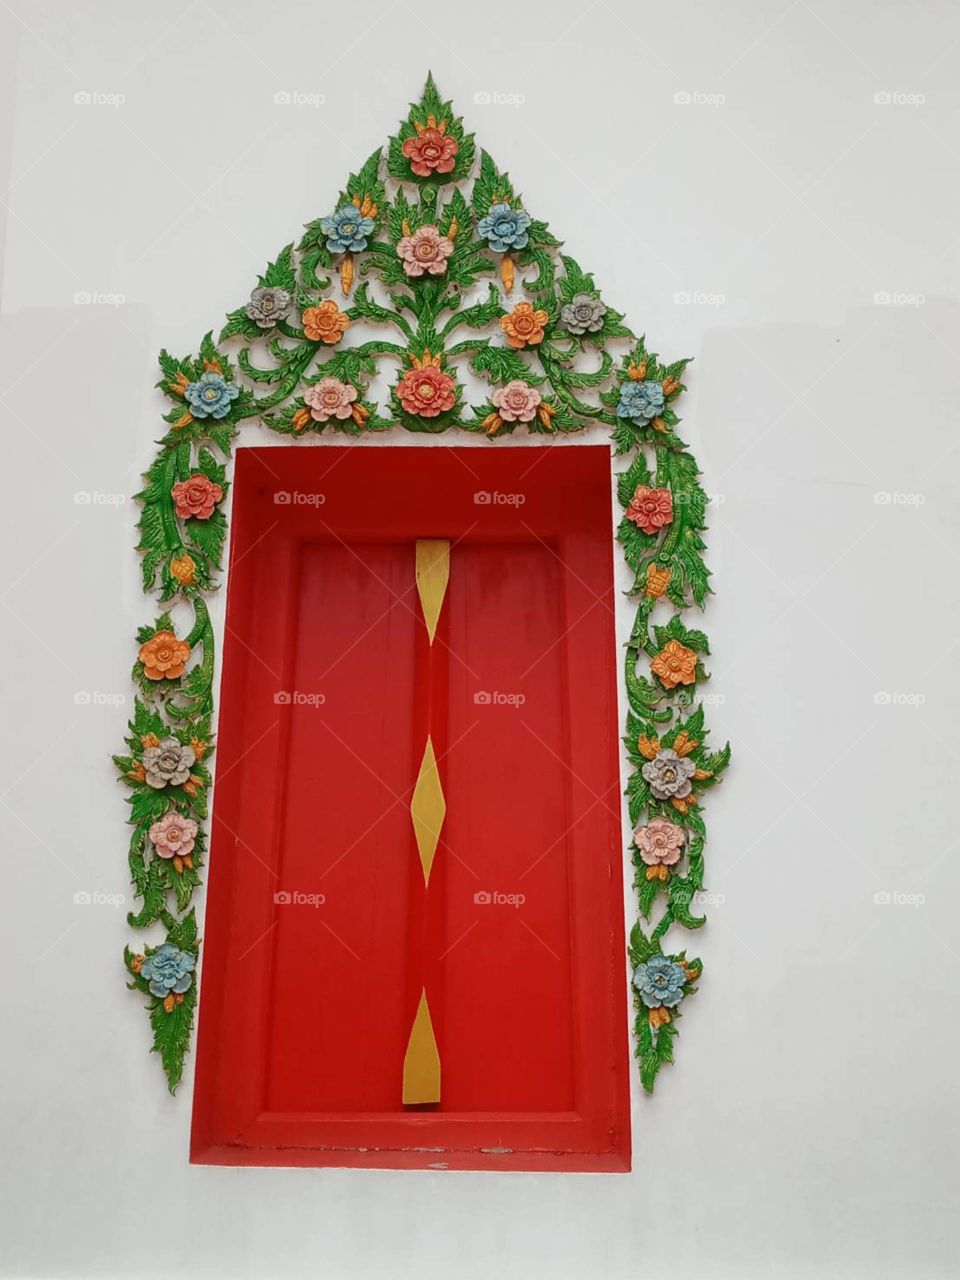 A perfect door match with color and design. This is a door to heaven for your peaceful mind. Is this also your heaven's door?